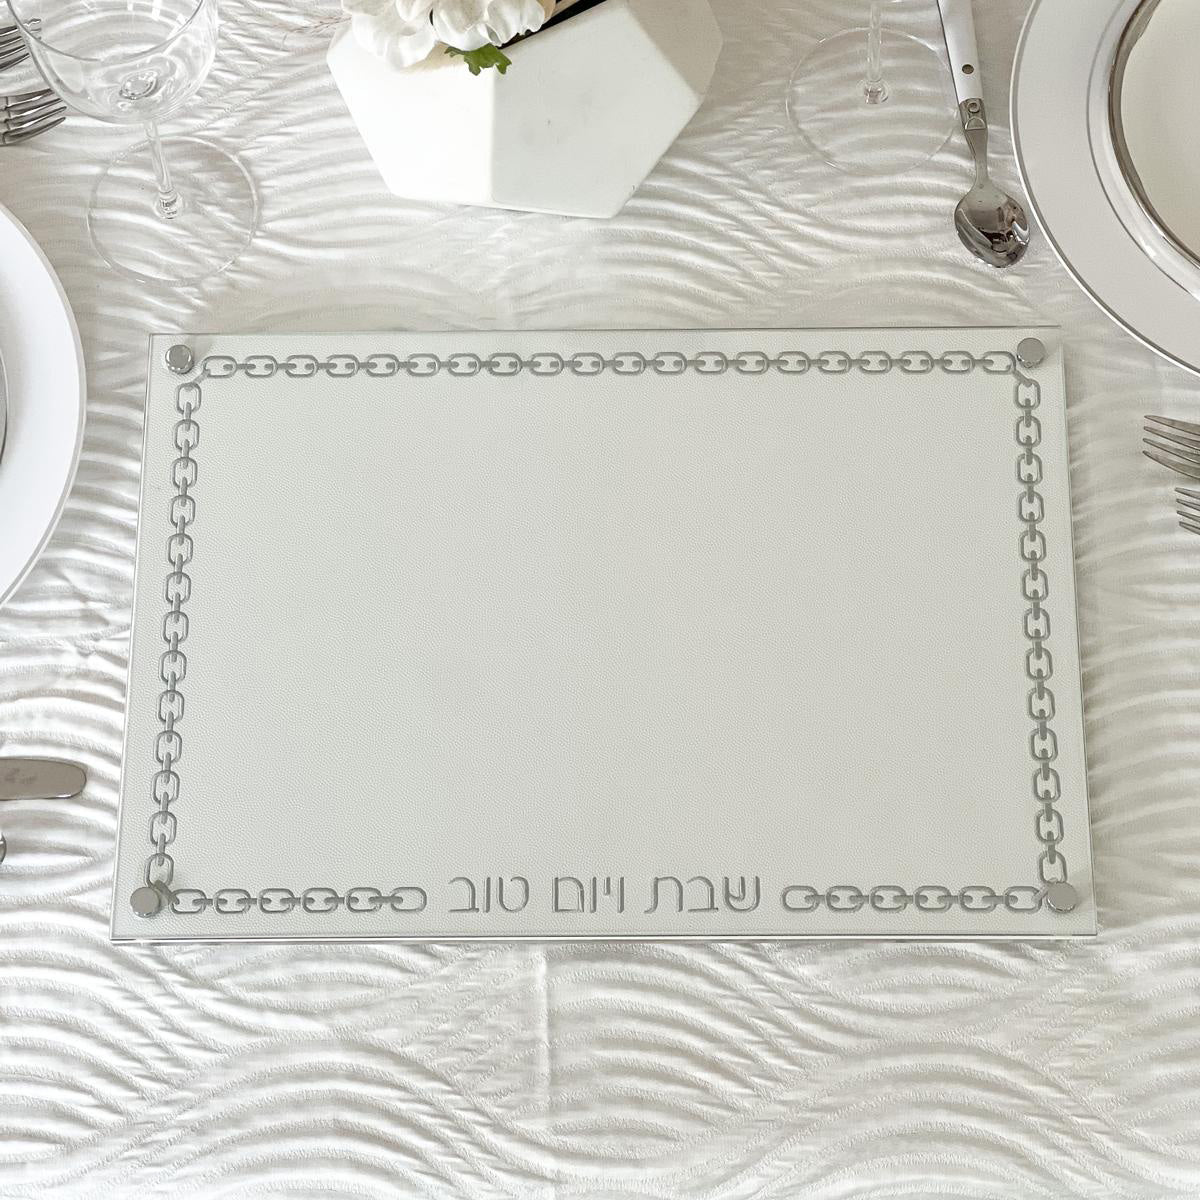 Glass Challah Board with Chain Design Embroidered Leatherette